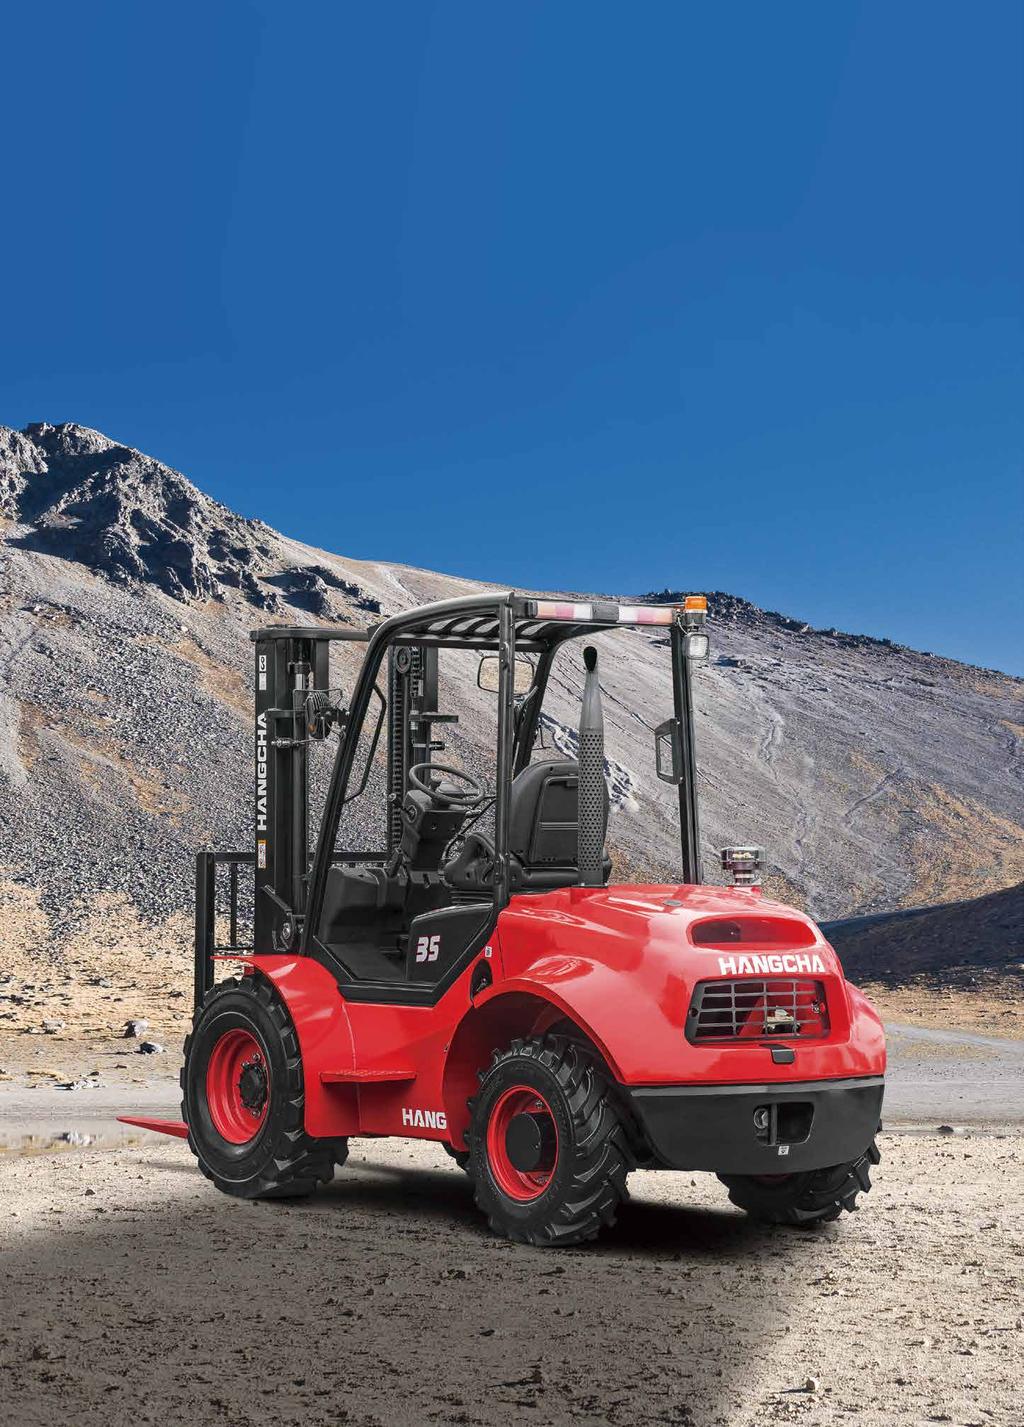 Four-Wheel Drive Rough Terrain Forklift 2017 VERSION 1COPYRIGHT 2017 with capacities of 2, to 3,kg ZHEJIANG HANGCHA IMP. &EXP. CO., LTD. Factory site: No.